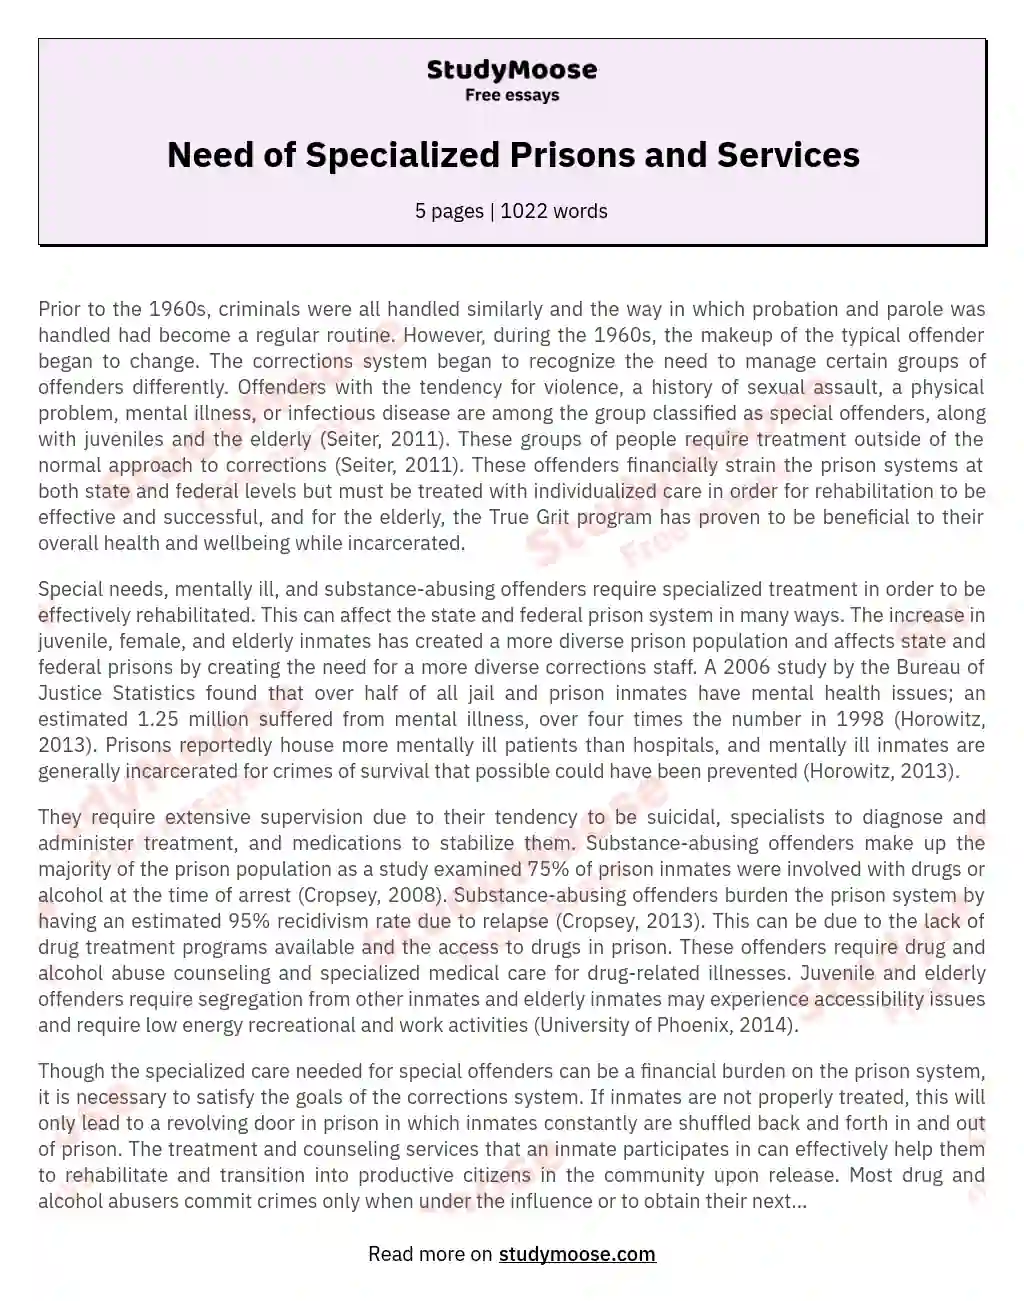 Need of Specialized Prisons and Services essay